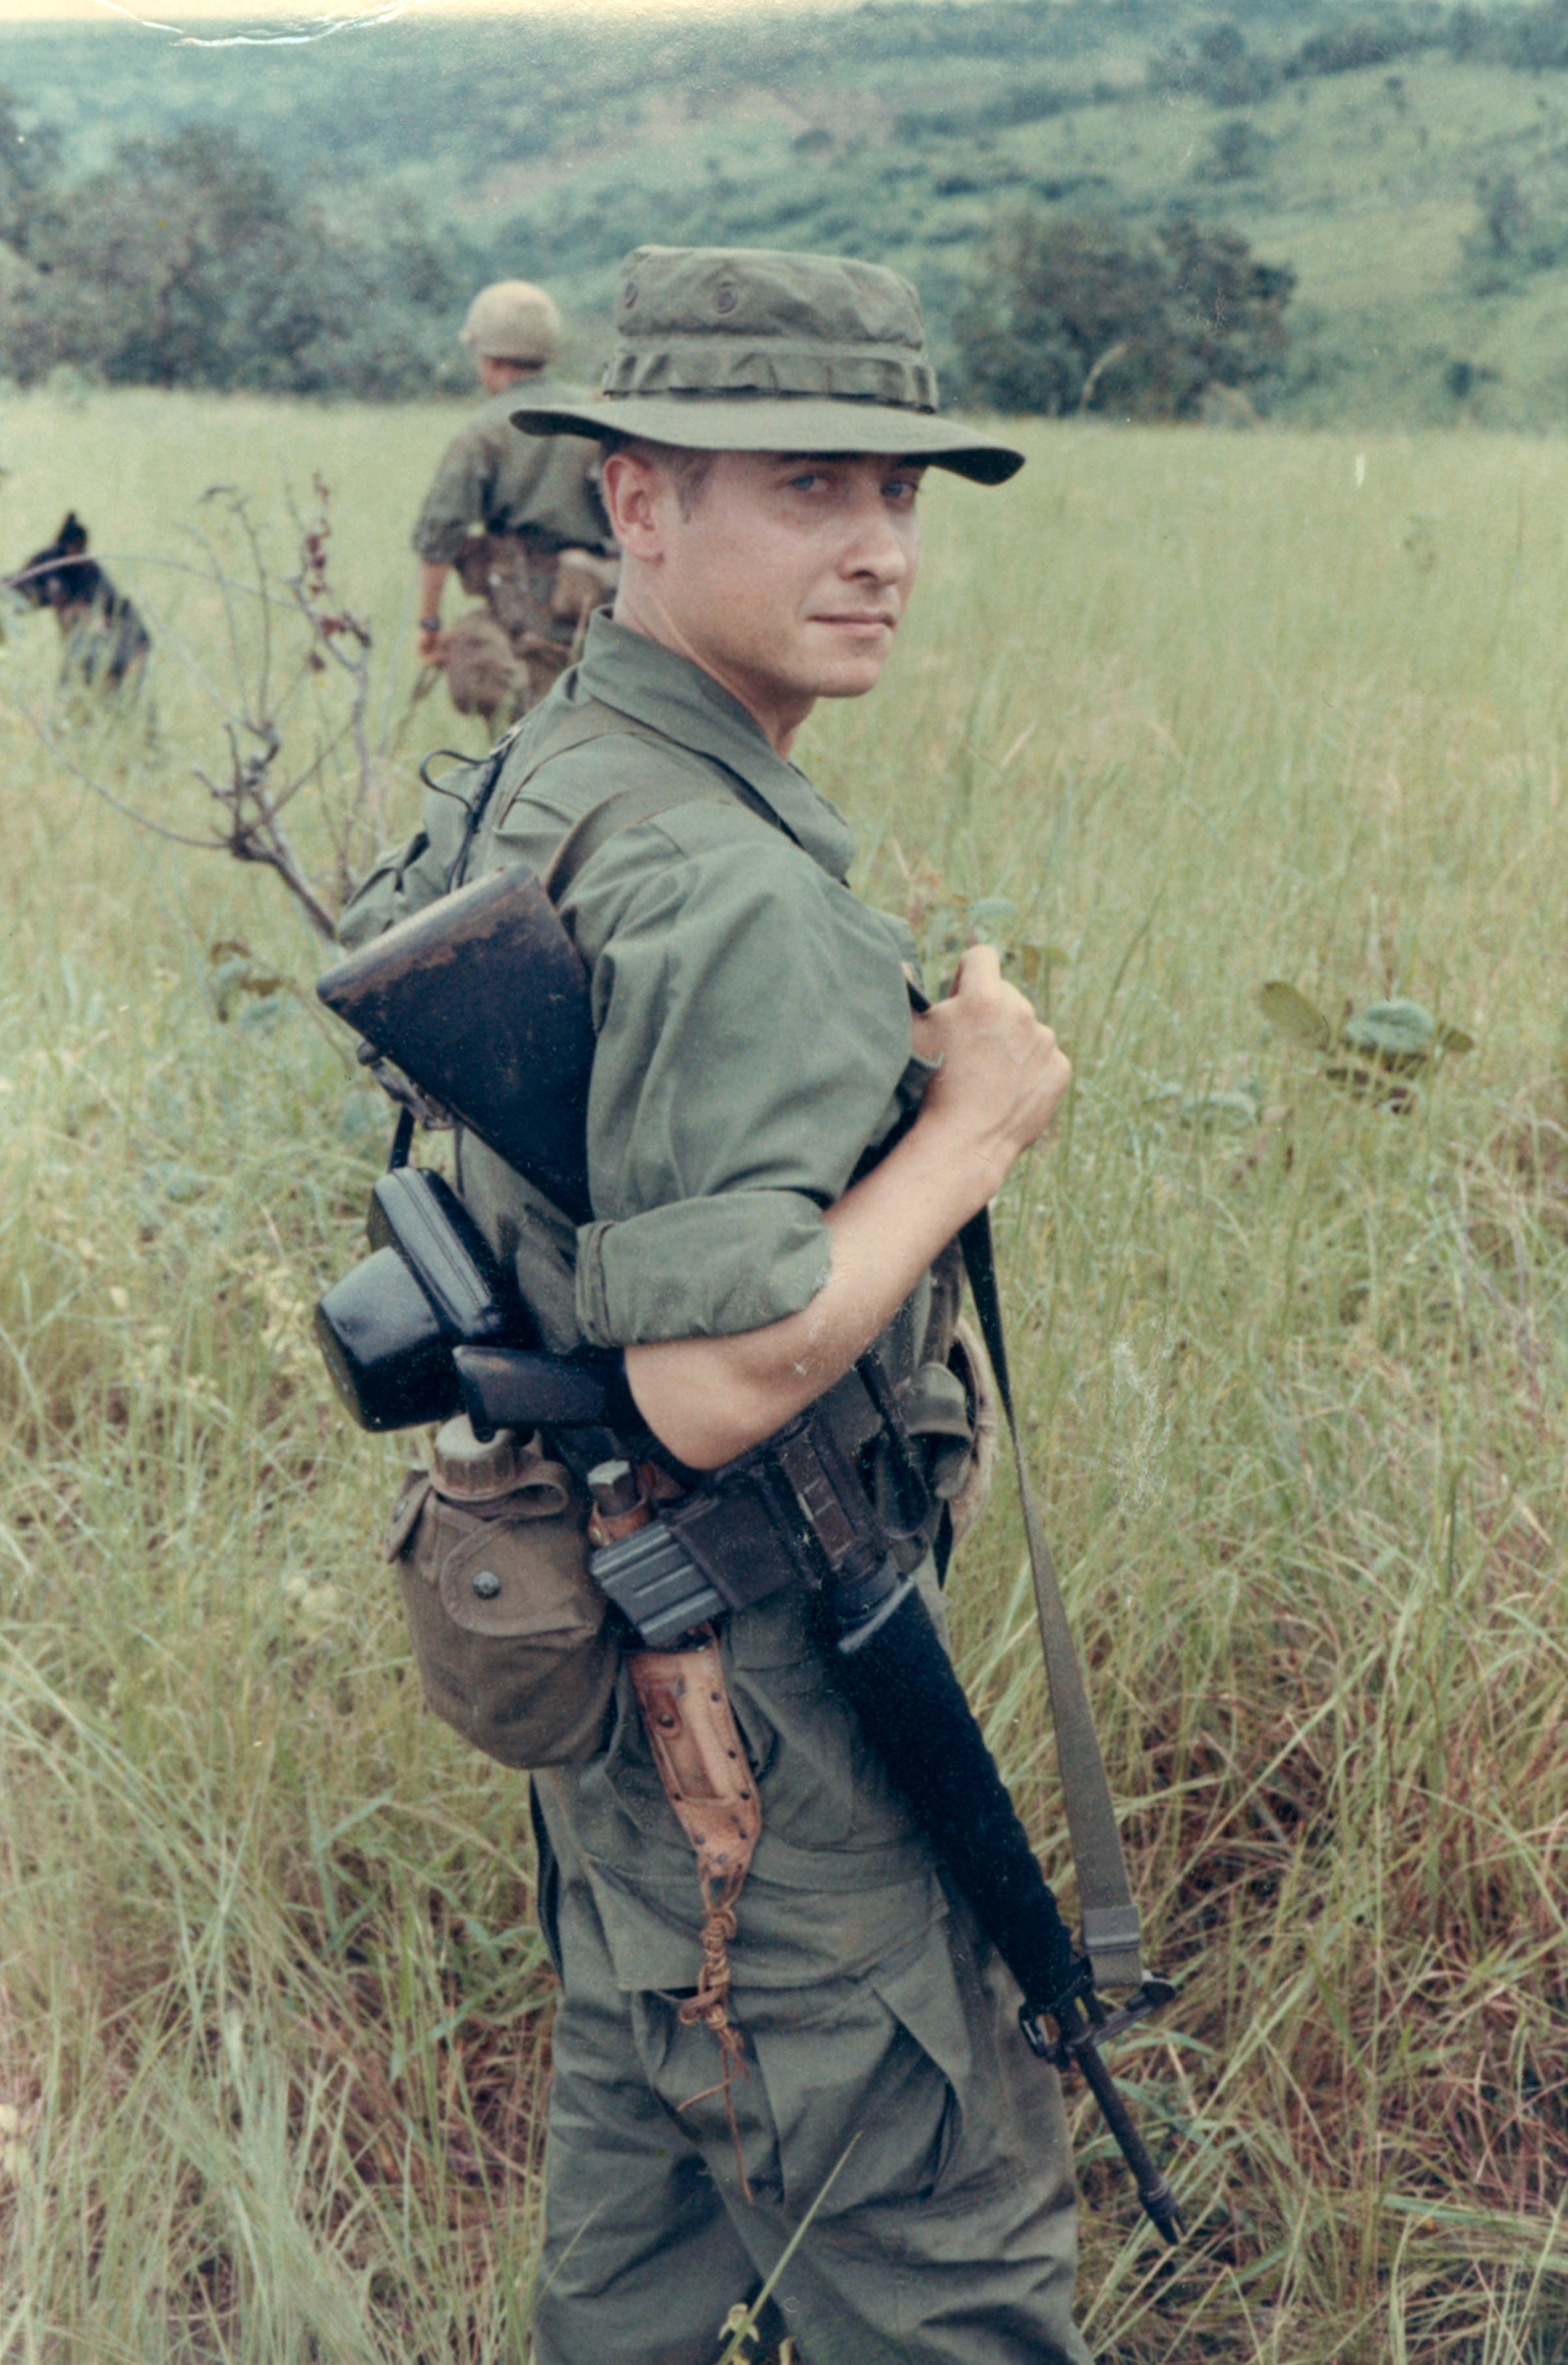 Jere Meacham on patrol in Vietnam with other members of the U.S. Army’s Fourth Infantry Division. He sent the images to his son in 1999